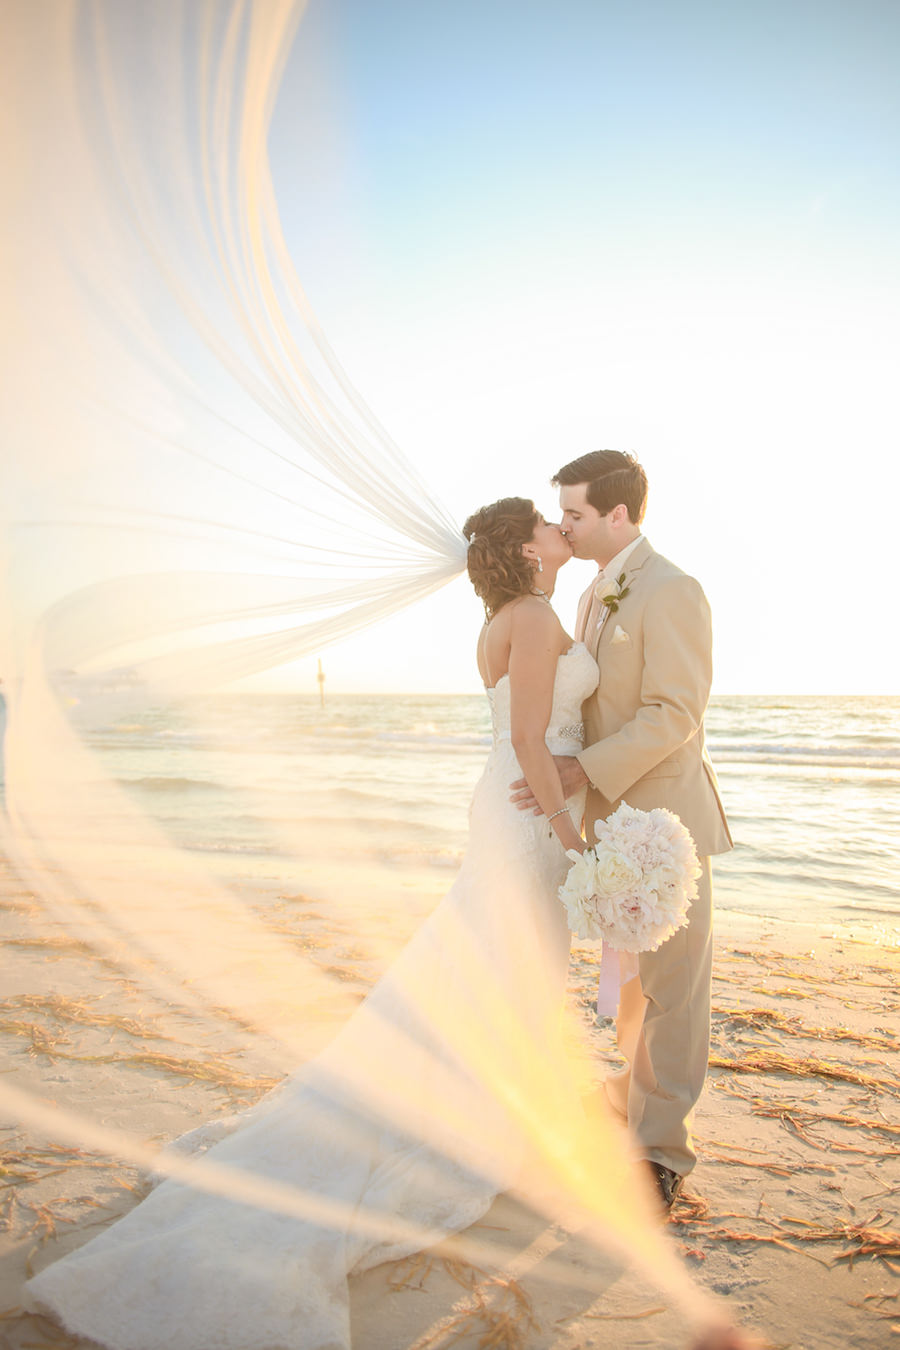 Bride and Groom Beach Wedding Portrait at Sunset Ivory Wedding Bouquet by Clearwater Wedding Florist Iza's Flowers